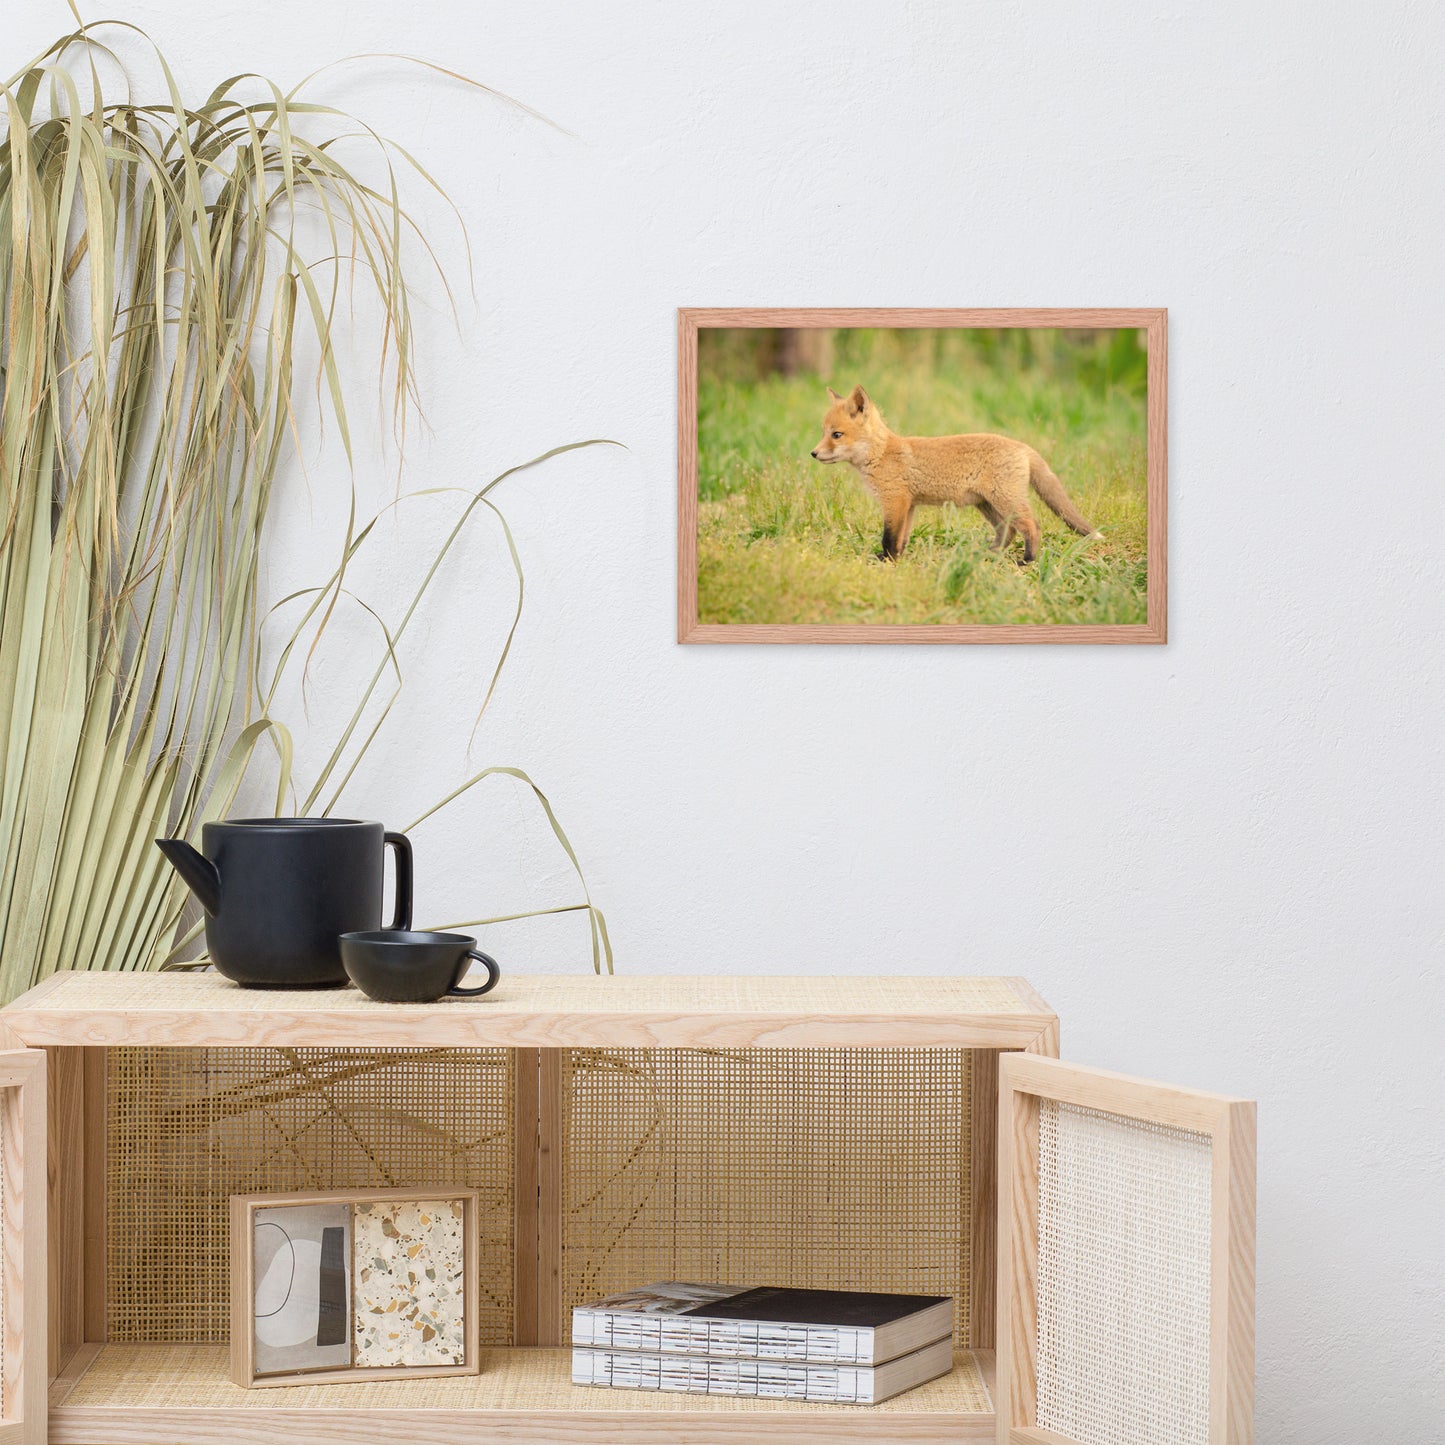 Nursery Hanging Wall Decor: Baby Fox Pup In Meadow/ Animal / Wildlife / Nature Photographic Artwork - Framed Artwork - Wall Decor